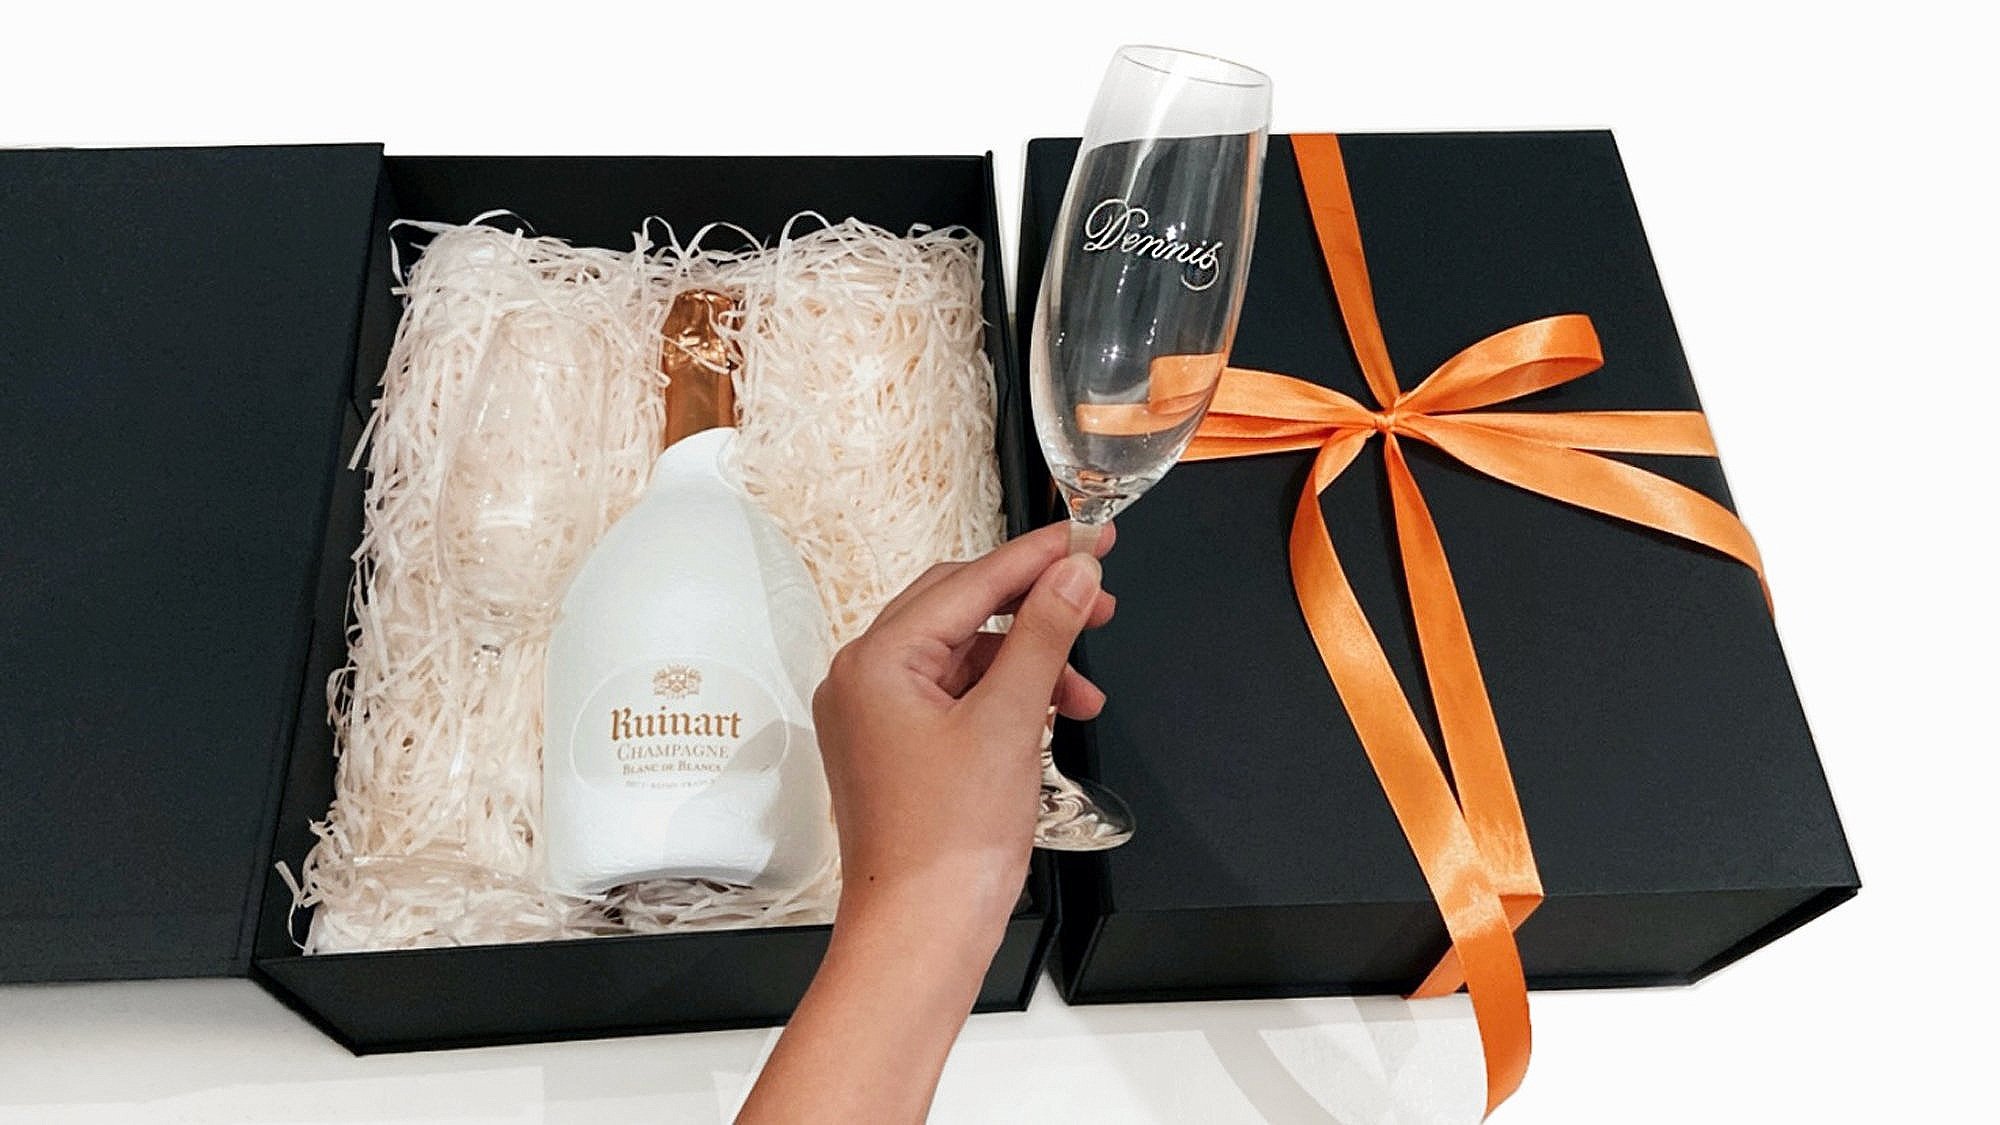 Pure Storage | Ruinart Second Skin Blanc de Blancs Champagne & Personalised Champagne Flutes Gift Box Sets